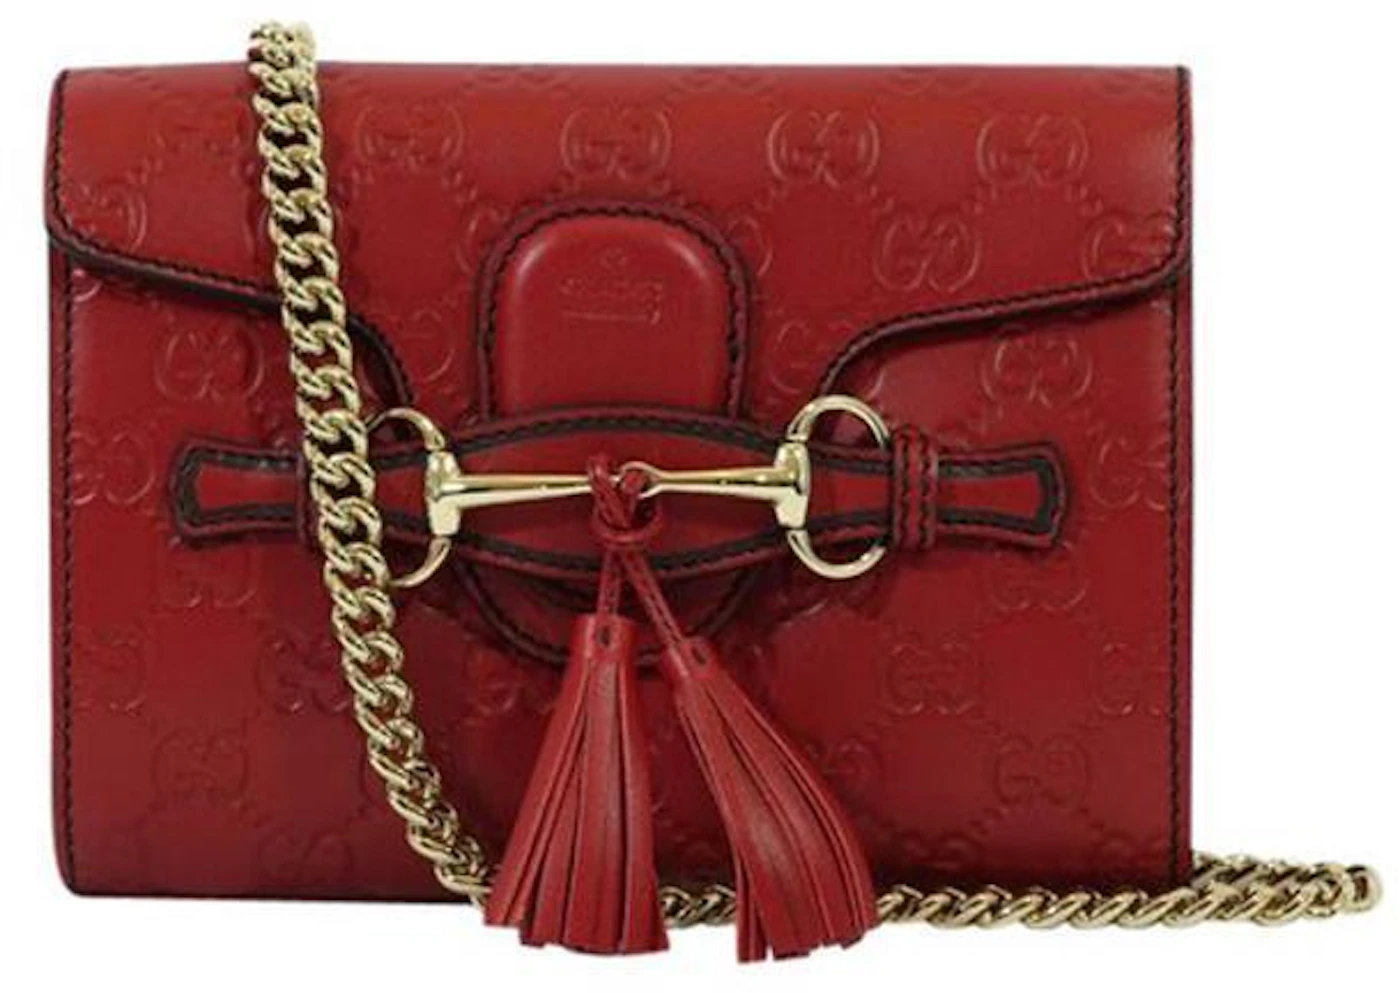 Gucci Emily Crossbody Guccissima Mini Red in Leather with Gold